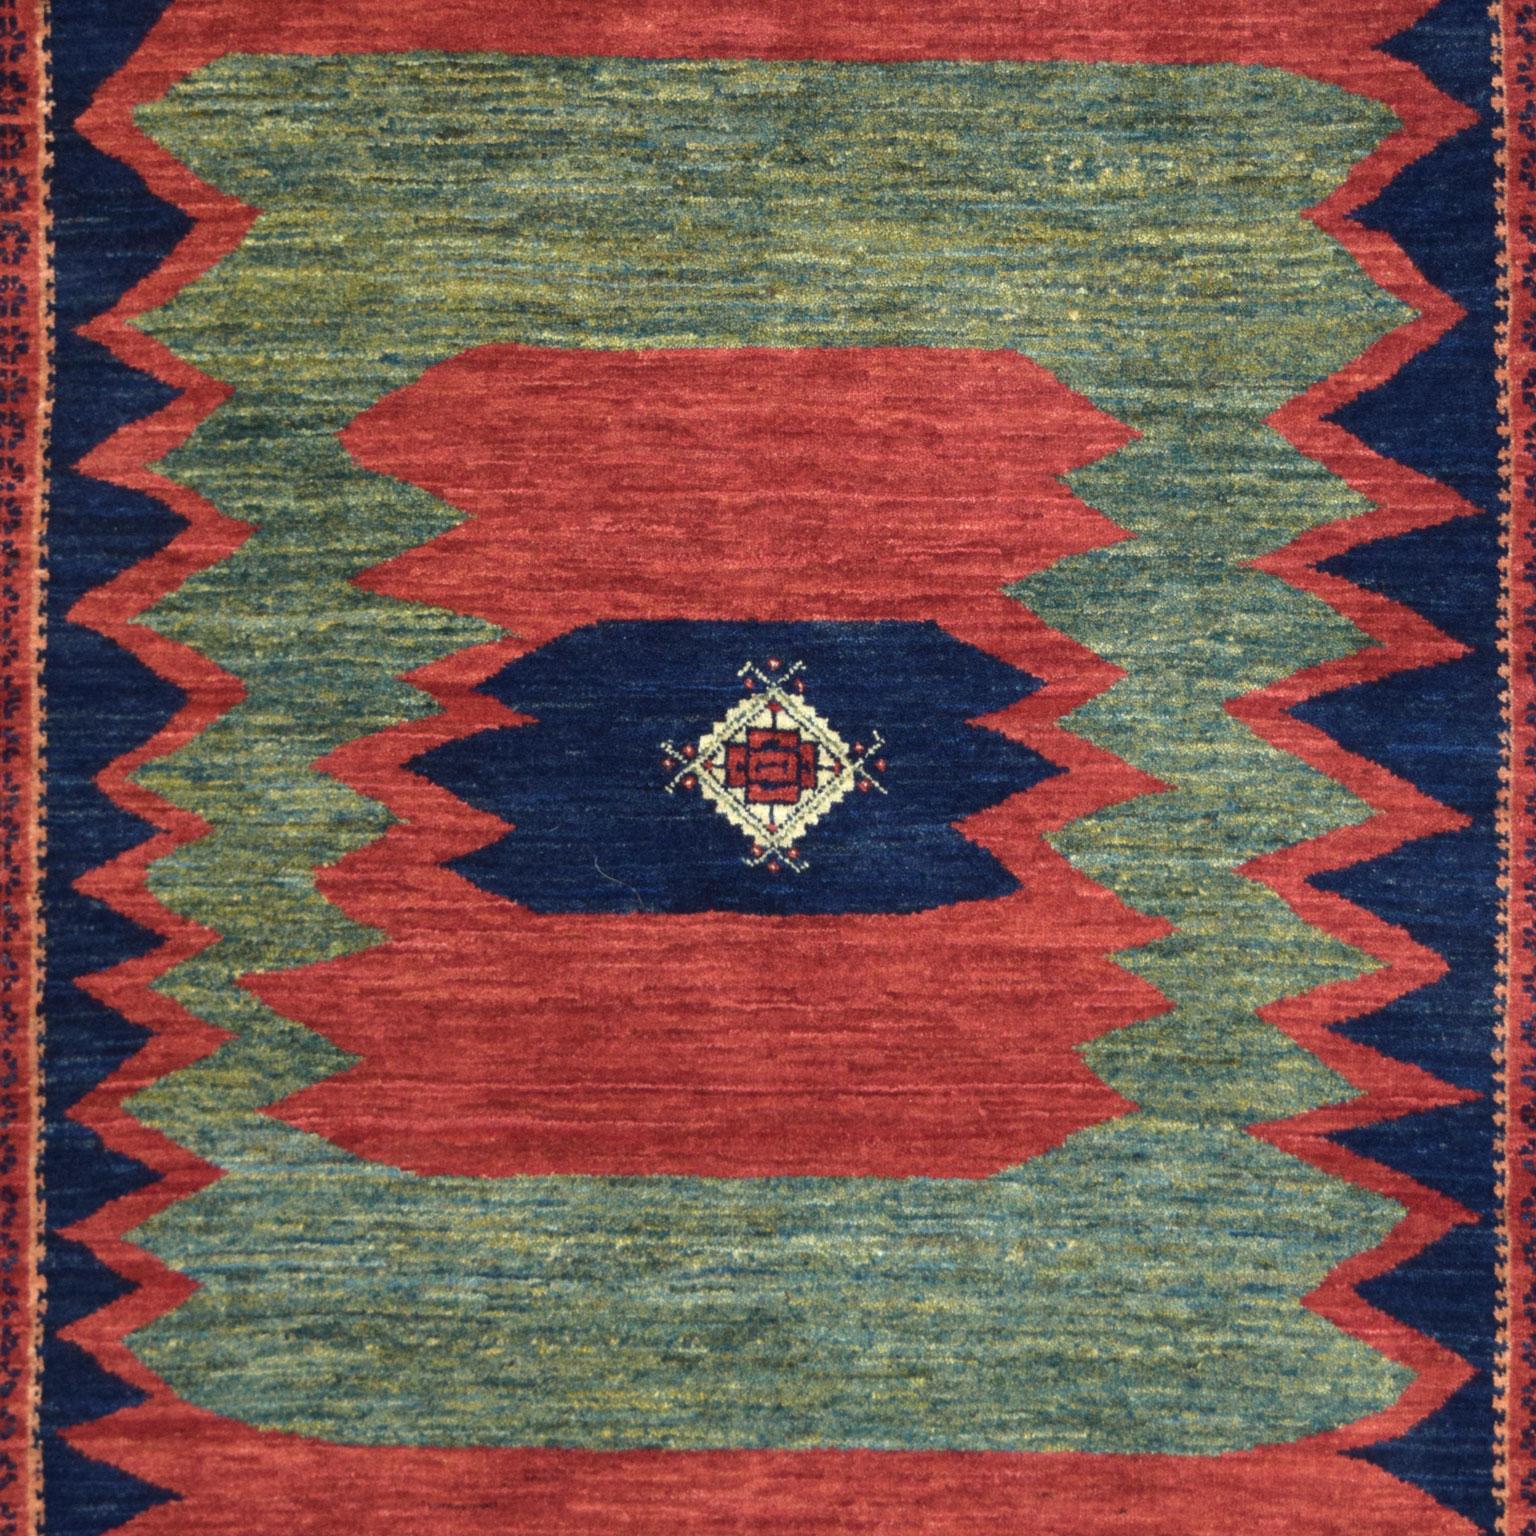 Pulling tribal inspirations from Persian Qashqai carpets, this hand-knotted rug, woven in rich green, red, indigo, and cream wool, measures 4’1”x 5’10” and belongs to the Orley Shabahang Tribal Collection. With a jagged and rudimentary interior